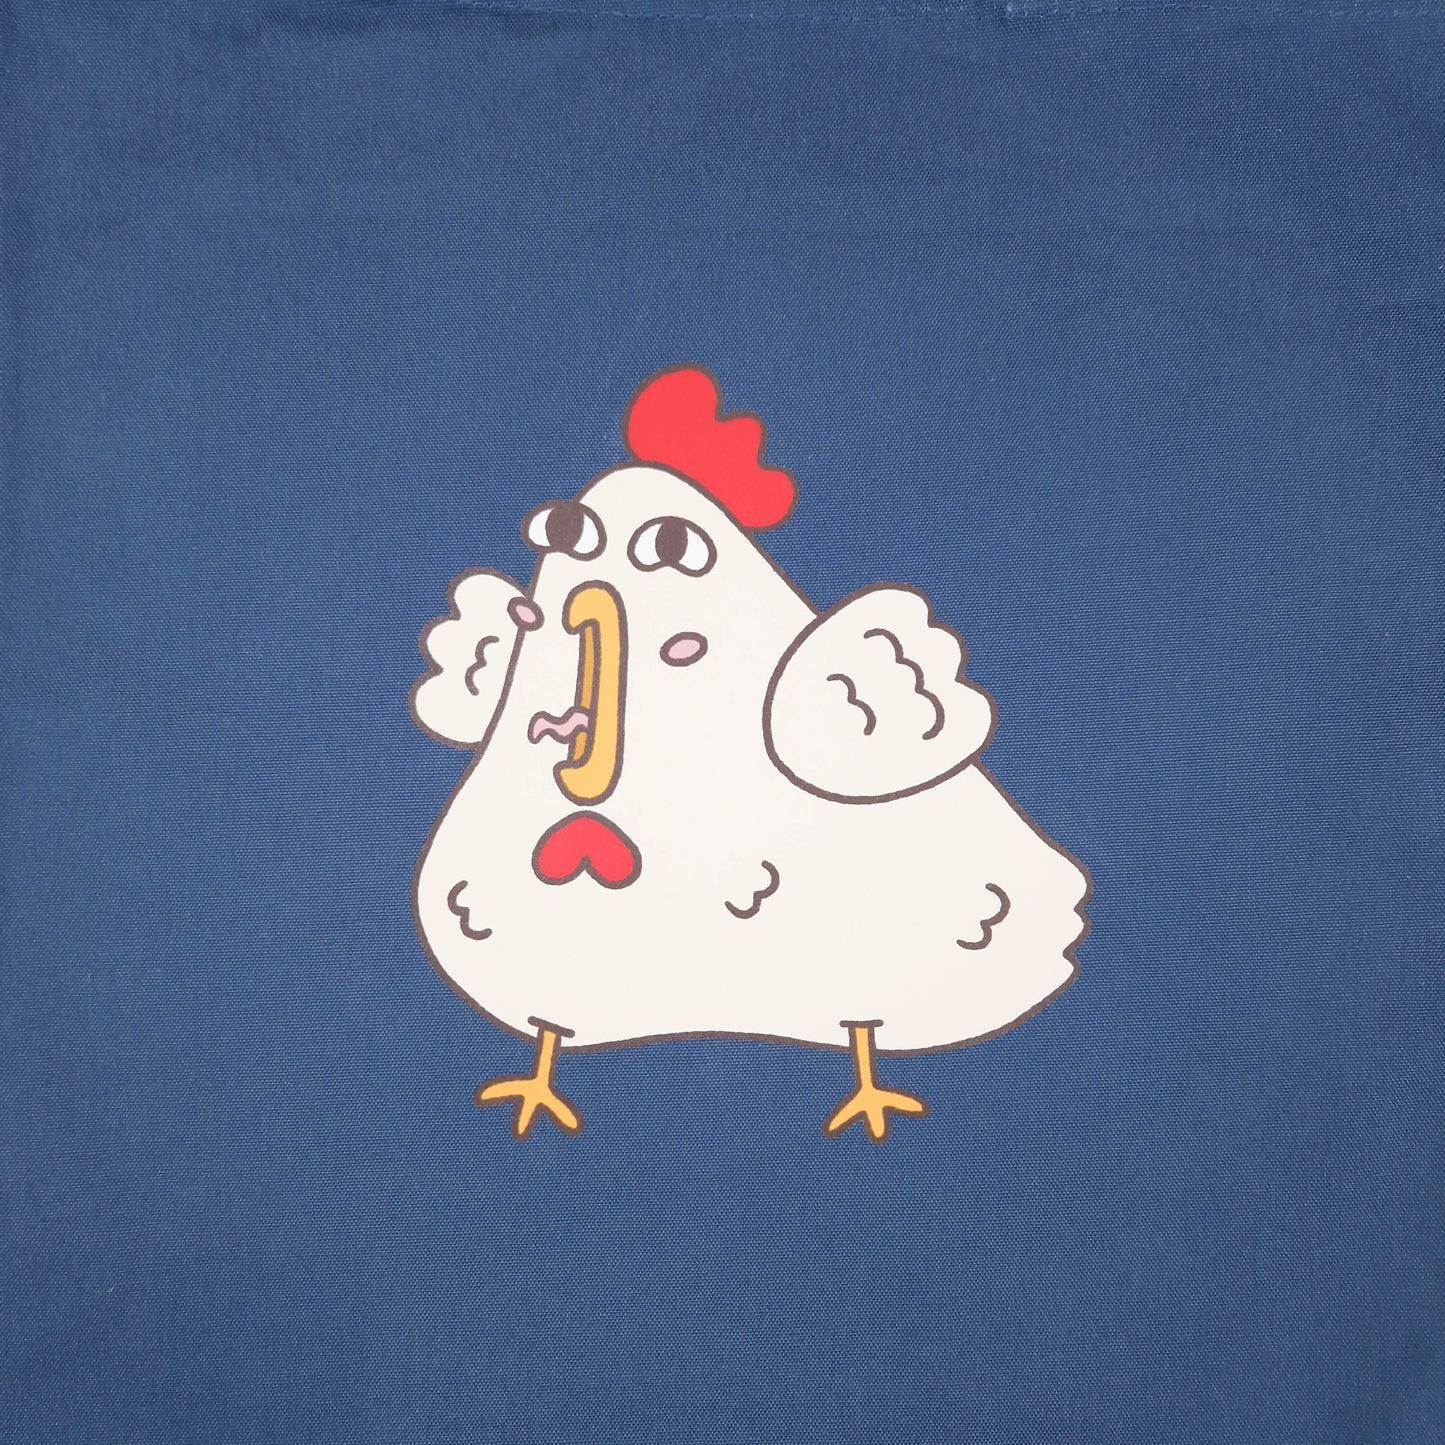 Screaming Chicken Tote Bag